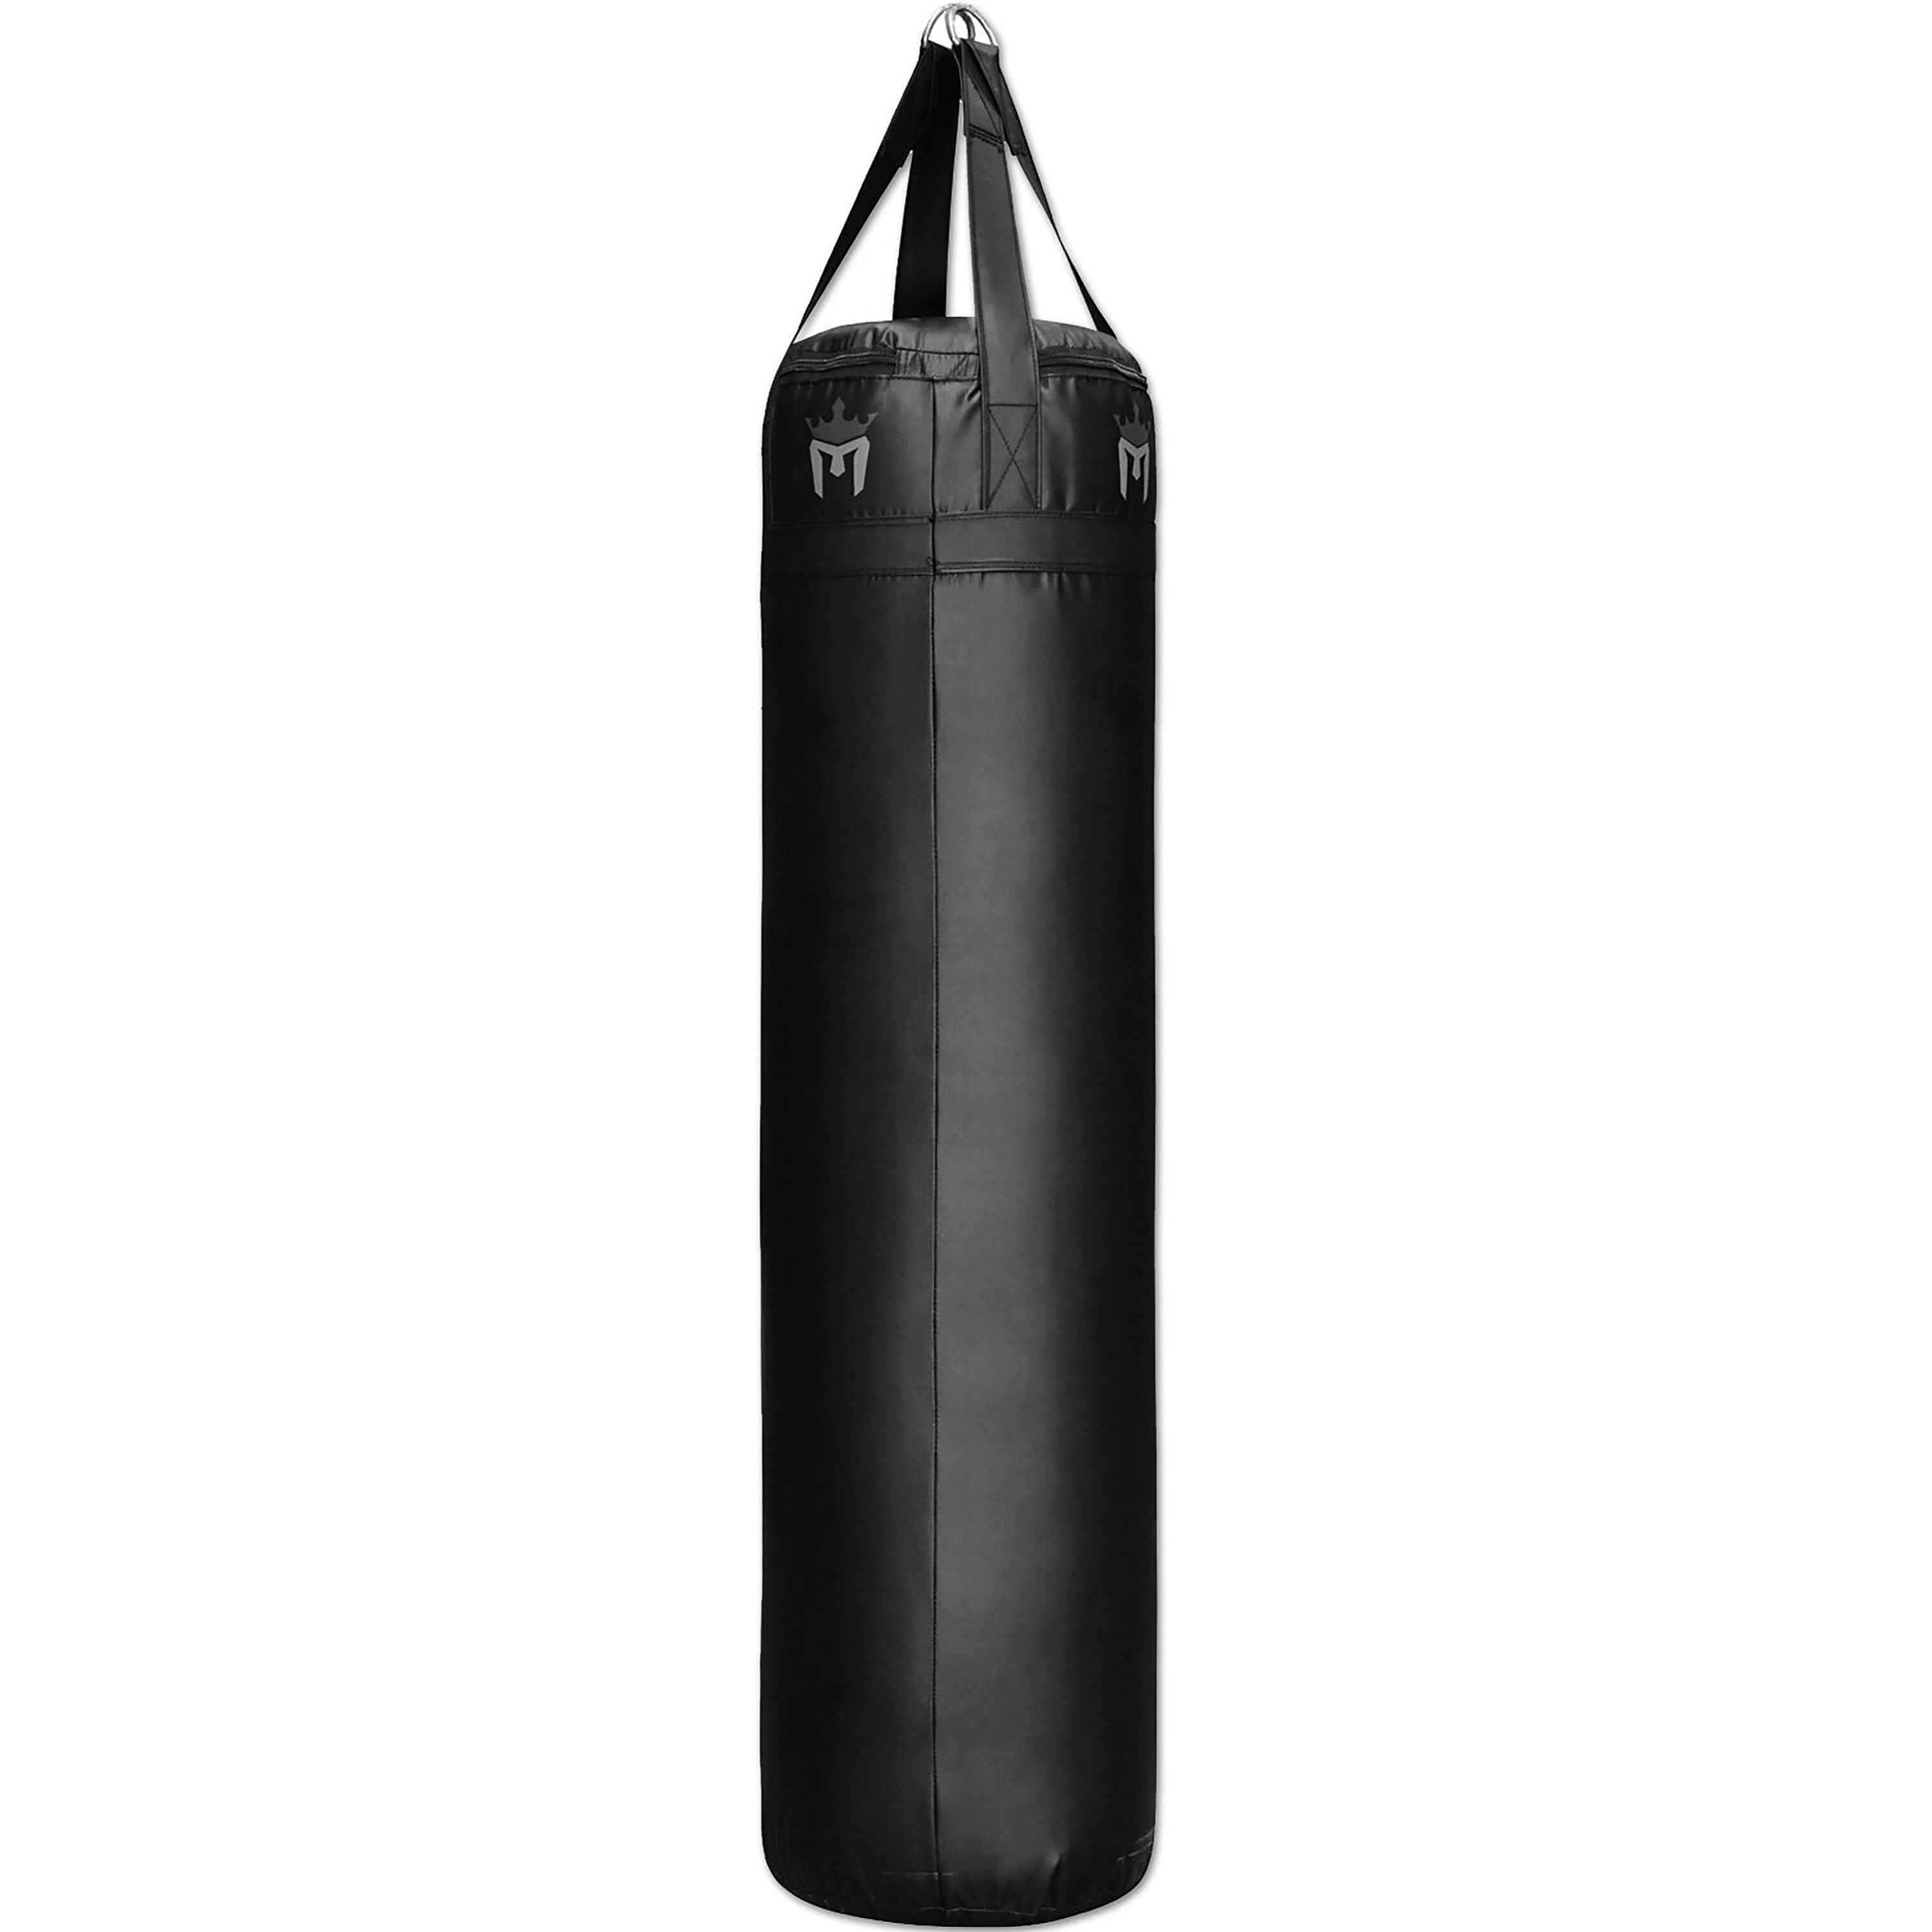 PROLAST Boxing MMA 300 lbs Wide Pro Heavy Punching Bag | Pro Fight Shop